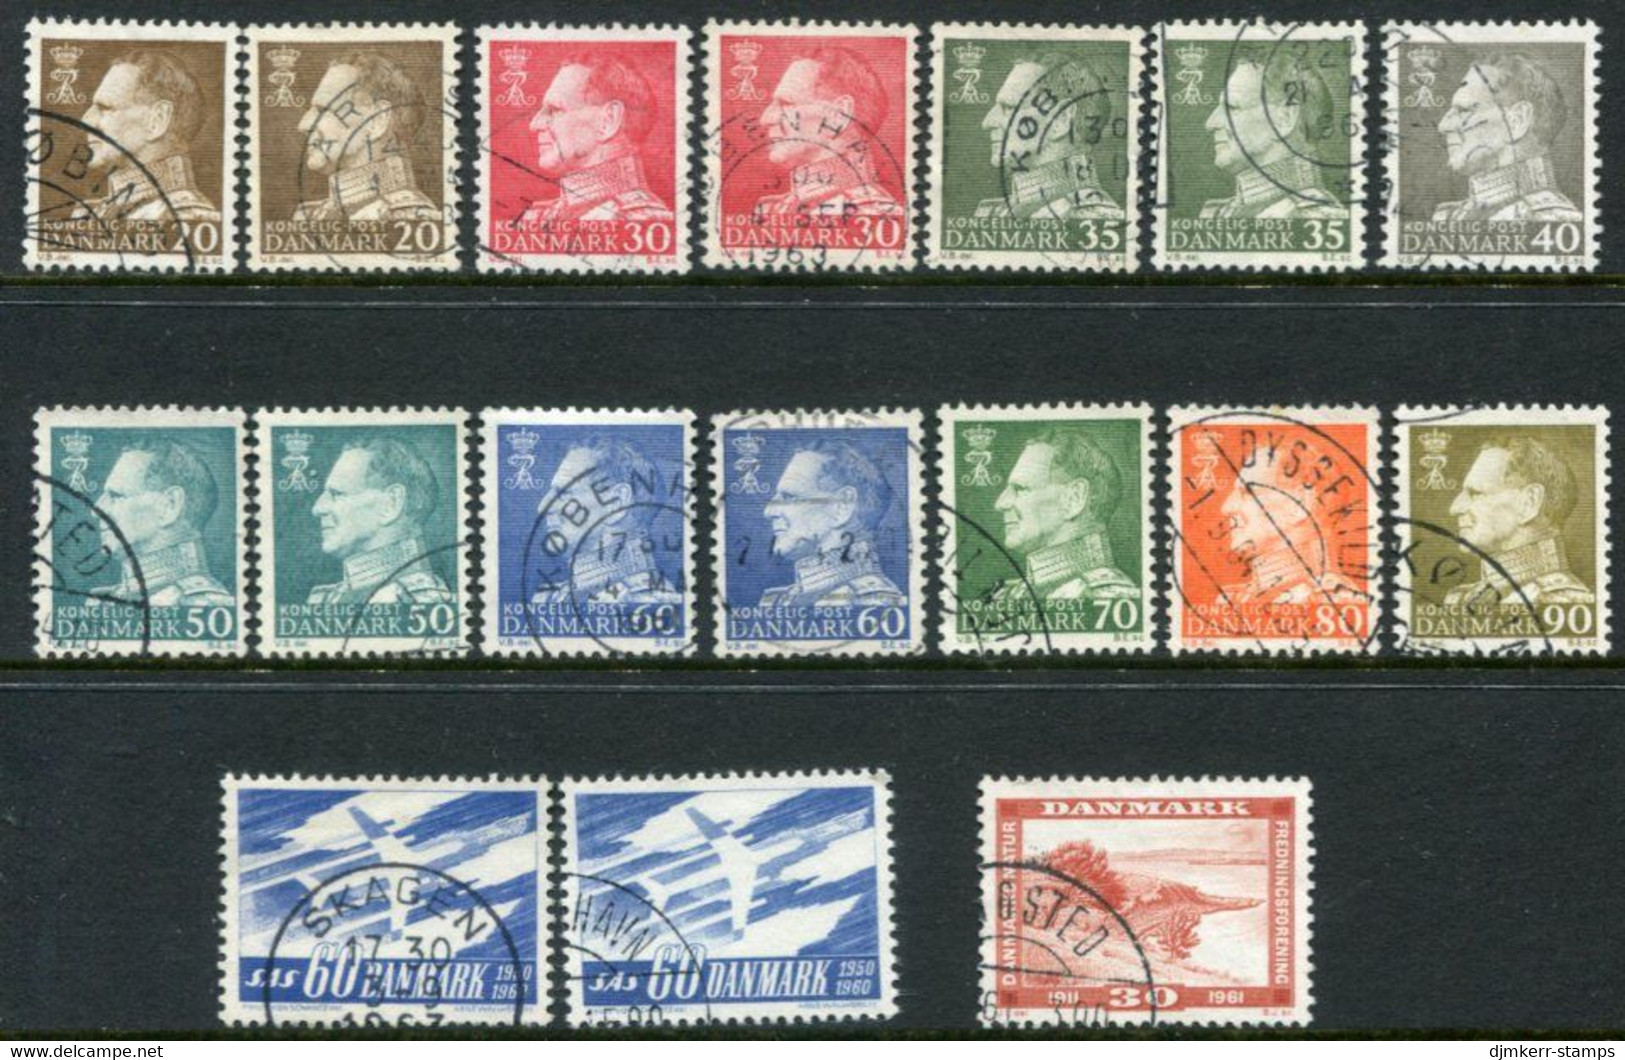 DENMARK 1961 Complete Issues With Ordinary And Fluorescent Papers, Used Michel 388-98 - Usado